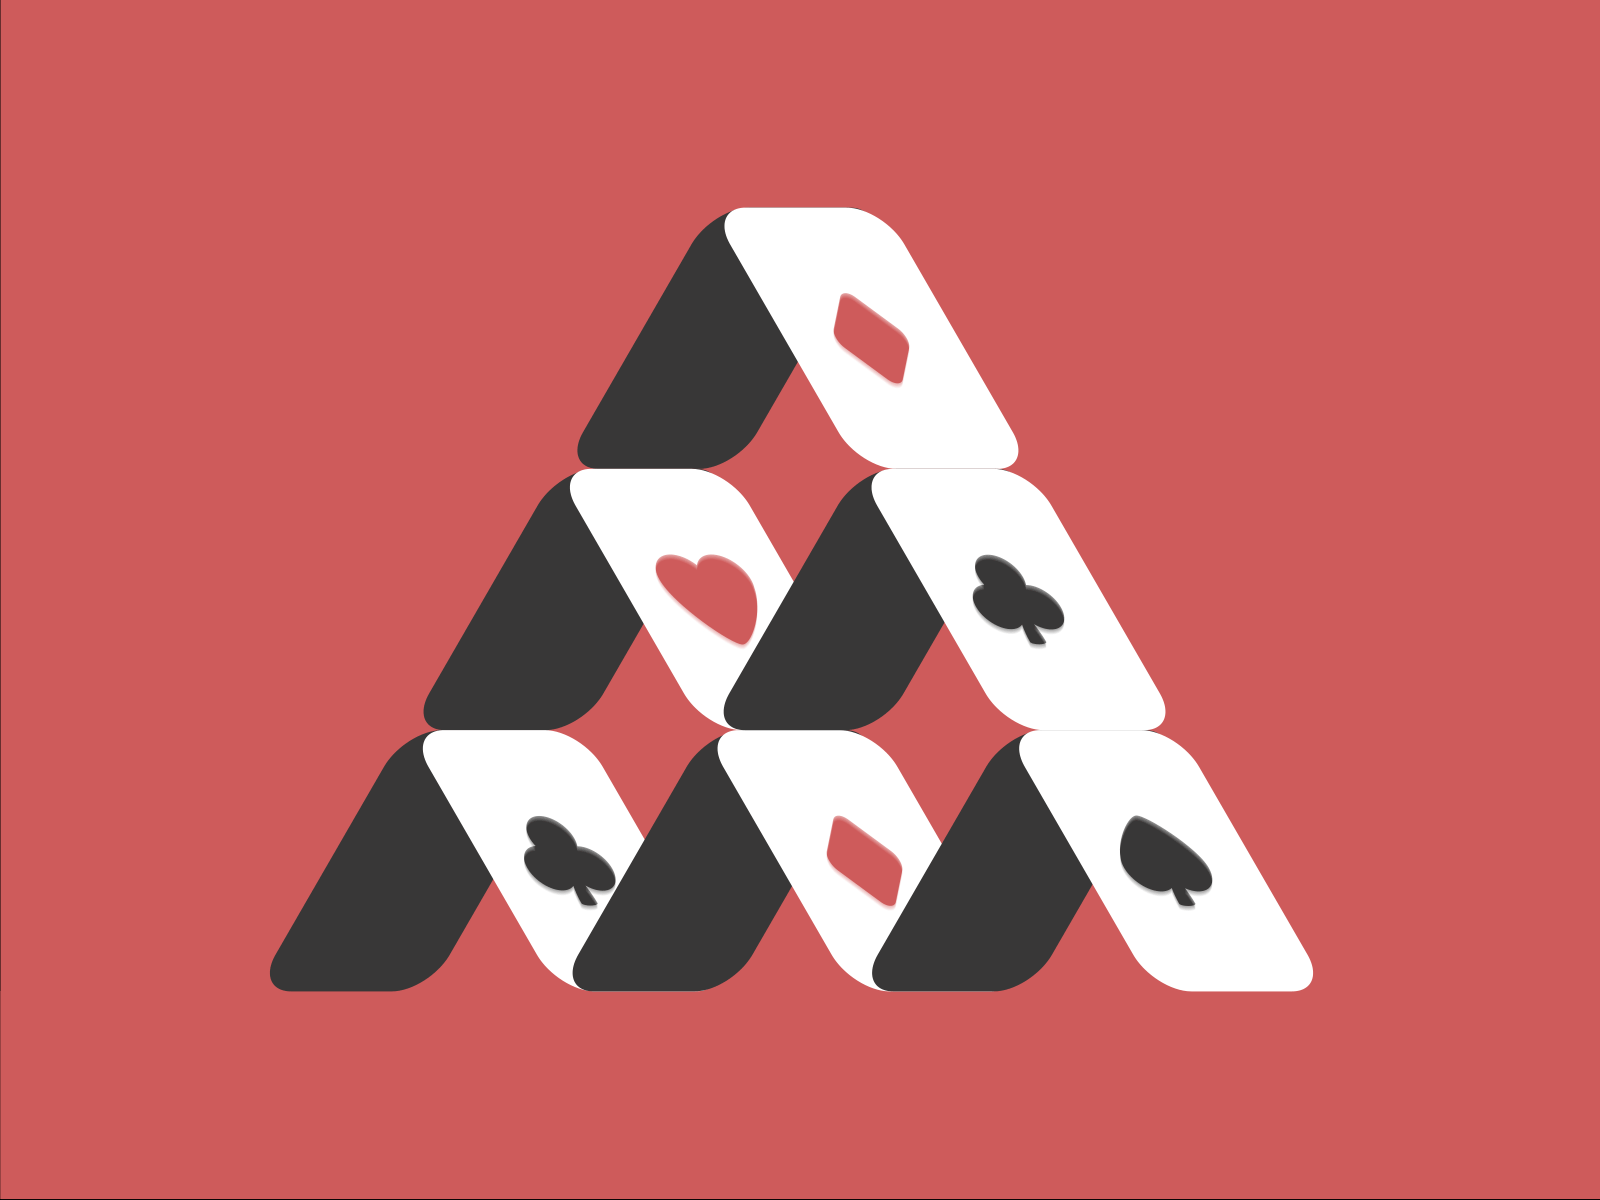 𝕙𝕠𝕦𝕤𝕖 𝕠𝕗 𝕔𝕒𝕣𝕕𝕤 ♠️♥️♦️♣️ ace ace of spades aftereffects animation card animation card game cards deconstructed dribbble dribbble best shot full house gif hearts house of cards illustration playing card spades weekly challenge weekly warm up weeklywarmup